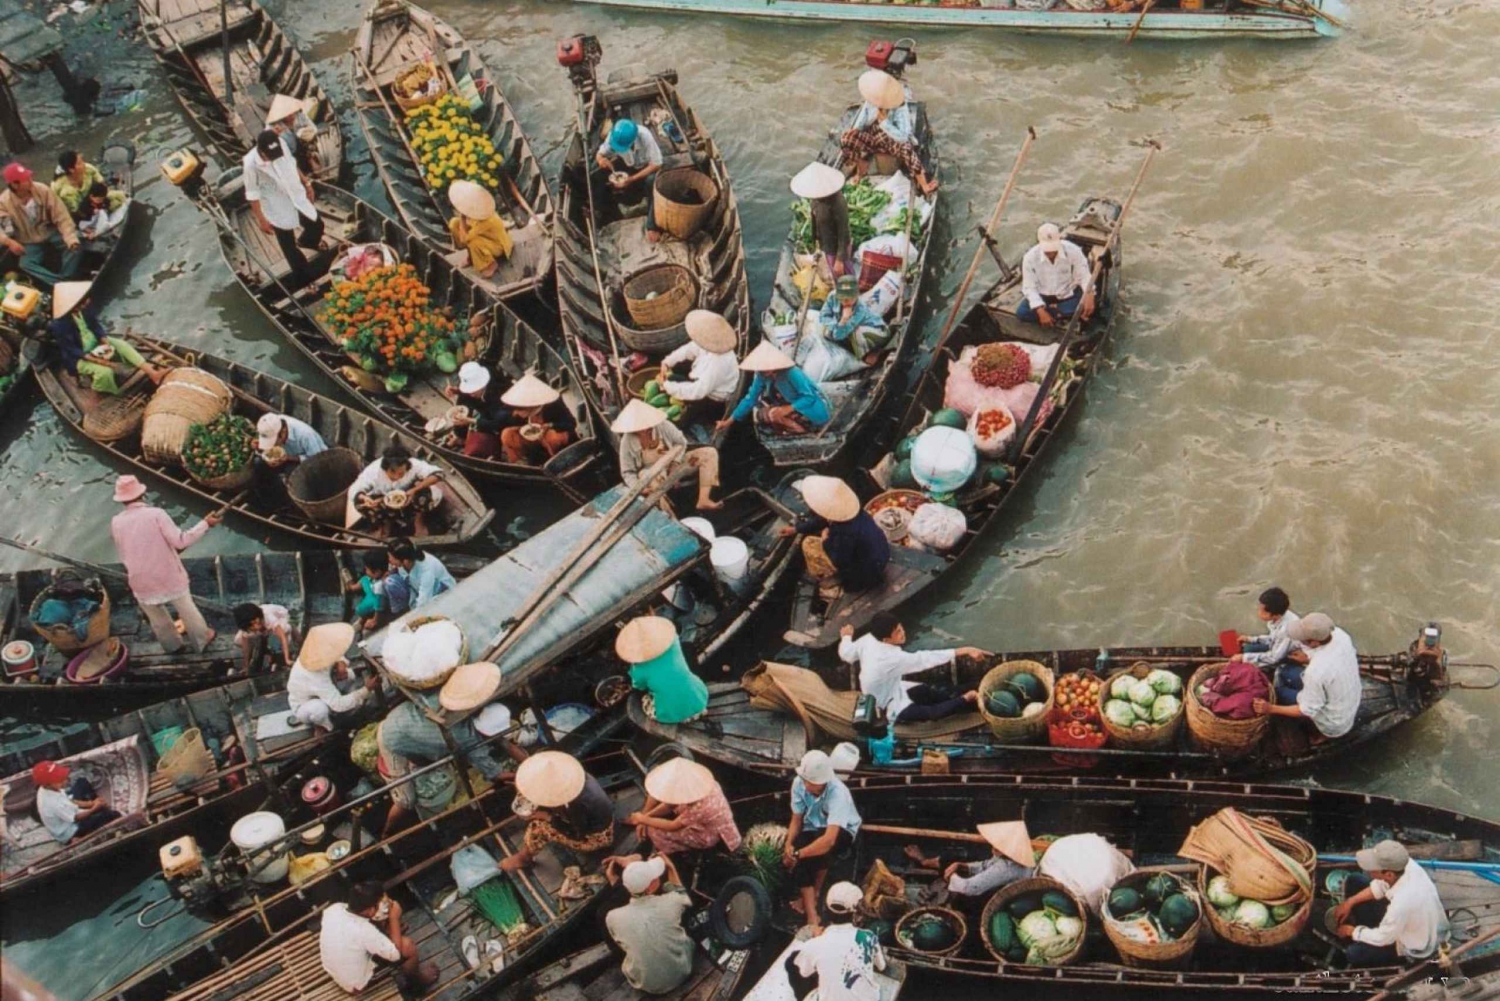 Cai Rang Famous Floating Market in Can Tho 1 day tour